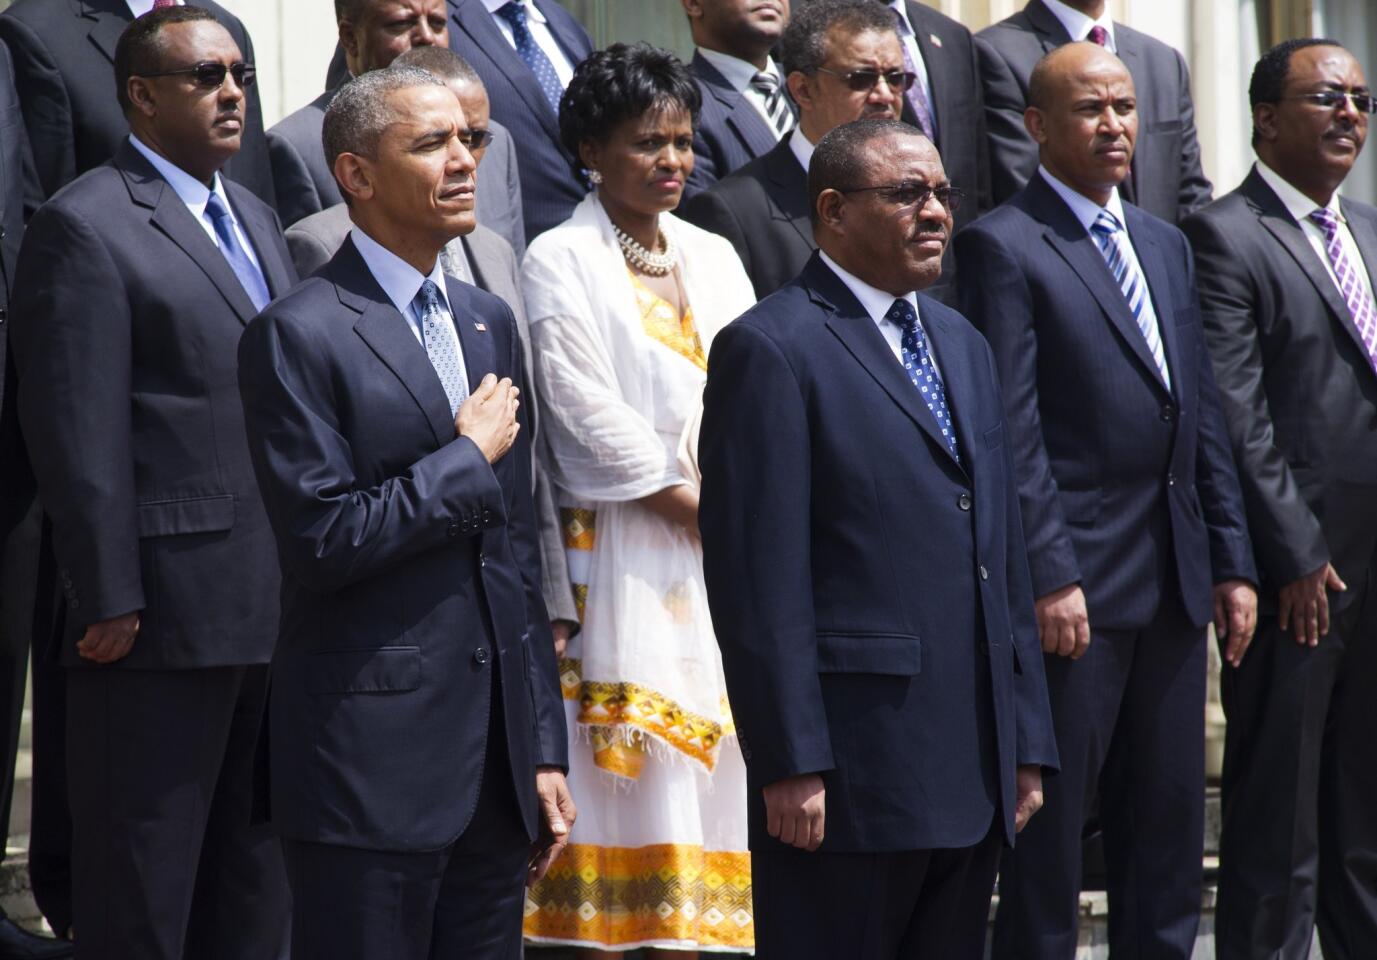 Ethiopian Prime Minister Hailemariam Desalegn (R) stands alongside President Barack Obama during the playing of the American National Anthem during a welcoming ceremony at the National Palace in Addis Ababa on July 27.